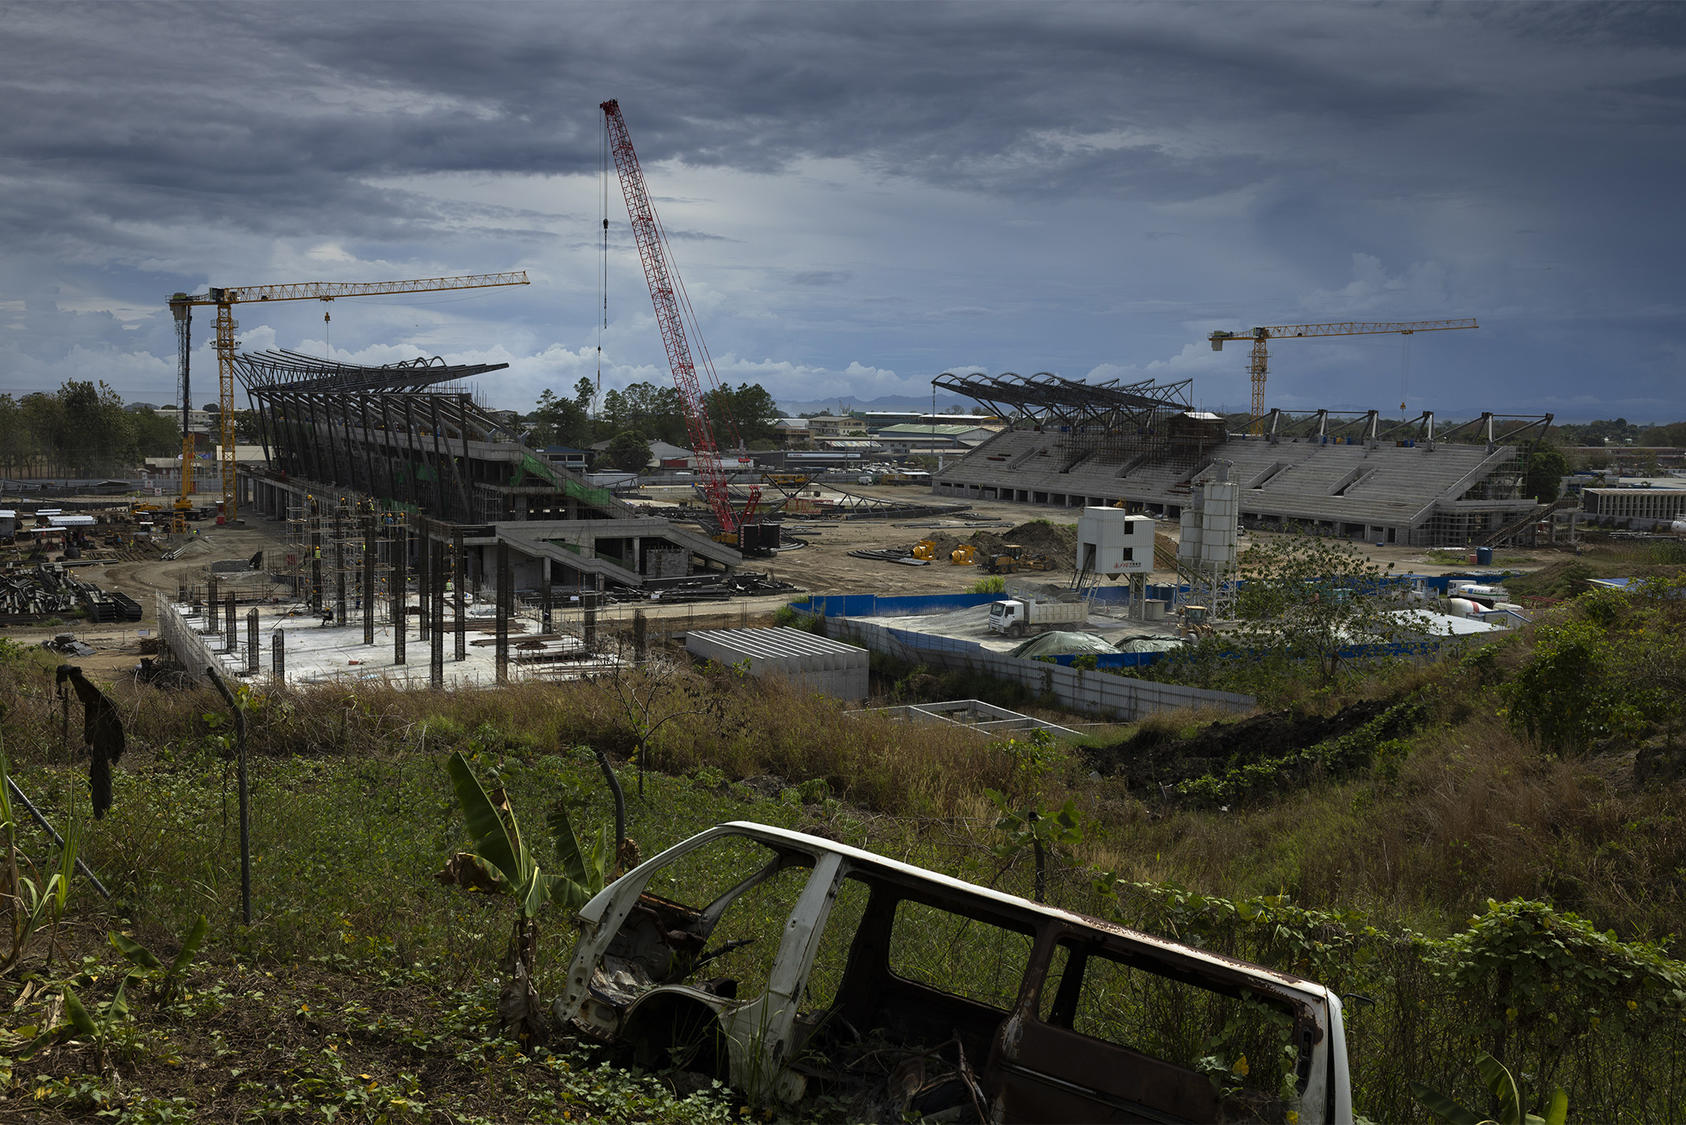 China has offered aid to Pacific nations, such as this sports stadium in the Solomon Islands, when they switch diplomatic recognition from Taiwan to Beijing, a boost for China’s roles in the region. (Matthew Abbott/The New York Times)